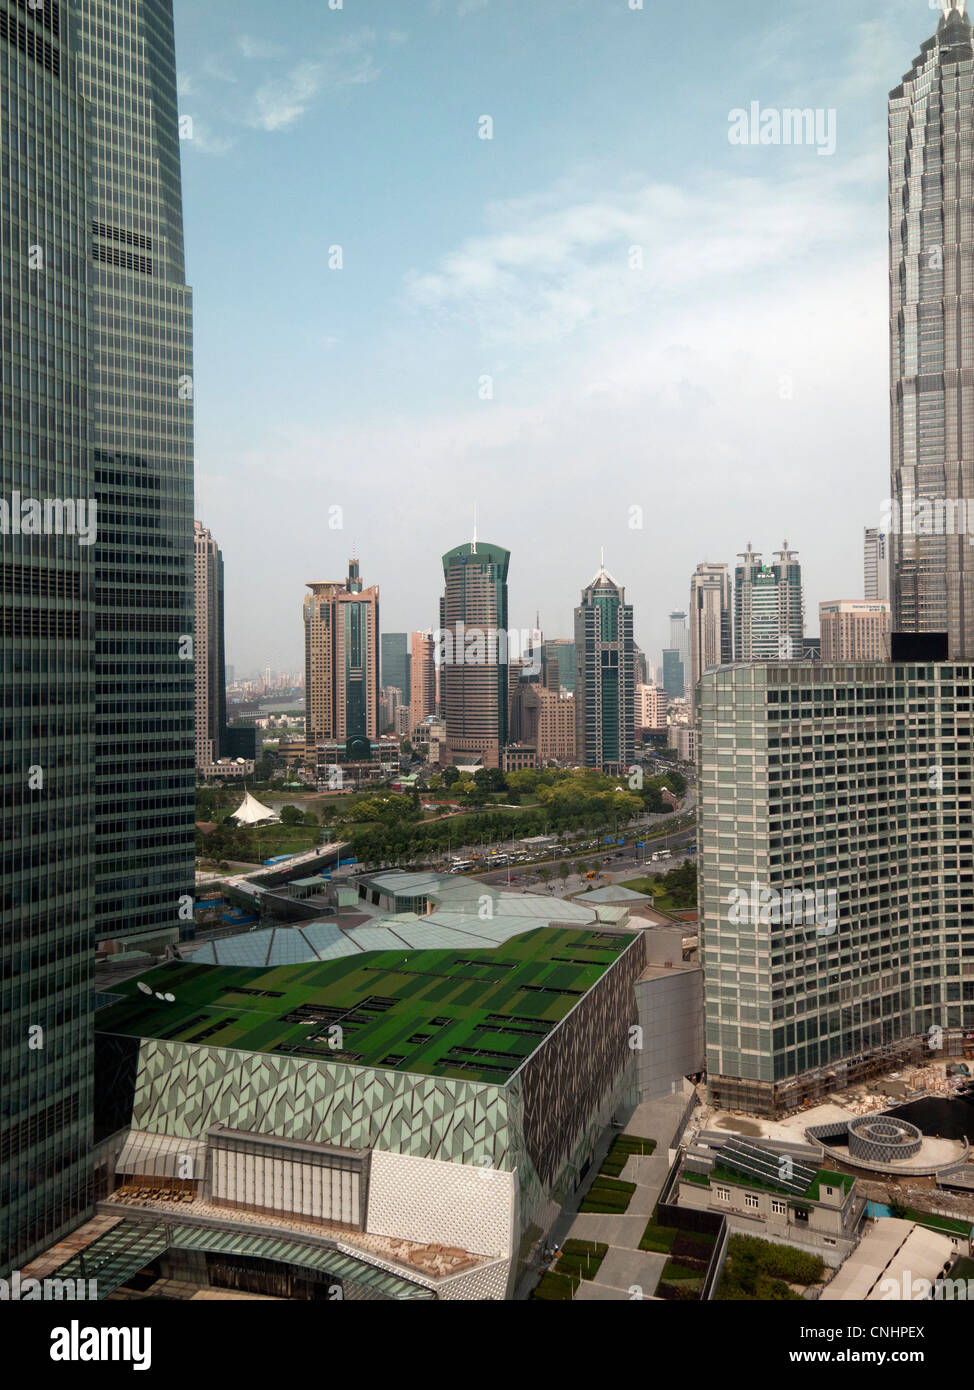 A roof garden in downtown Shanghai, China Stock Photo